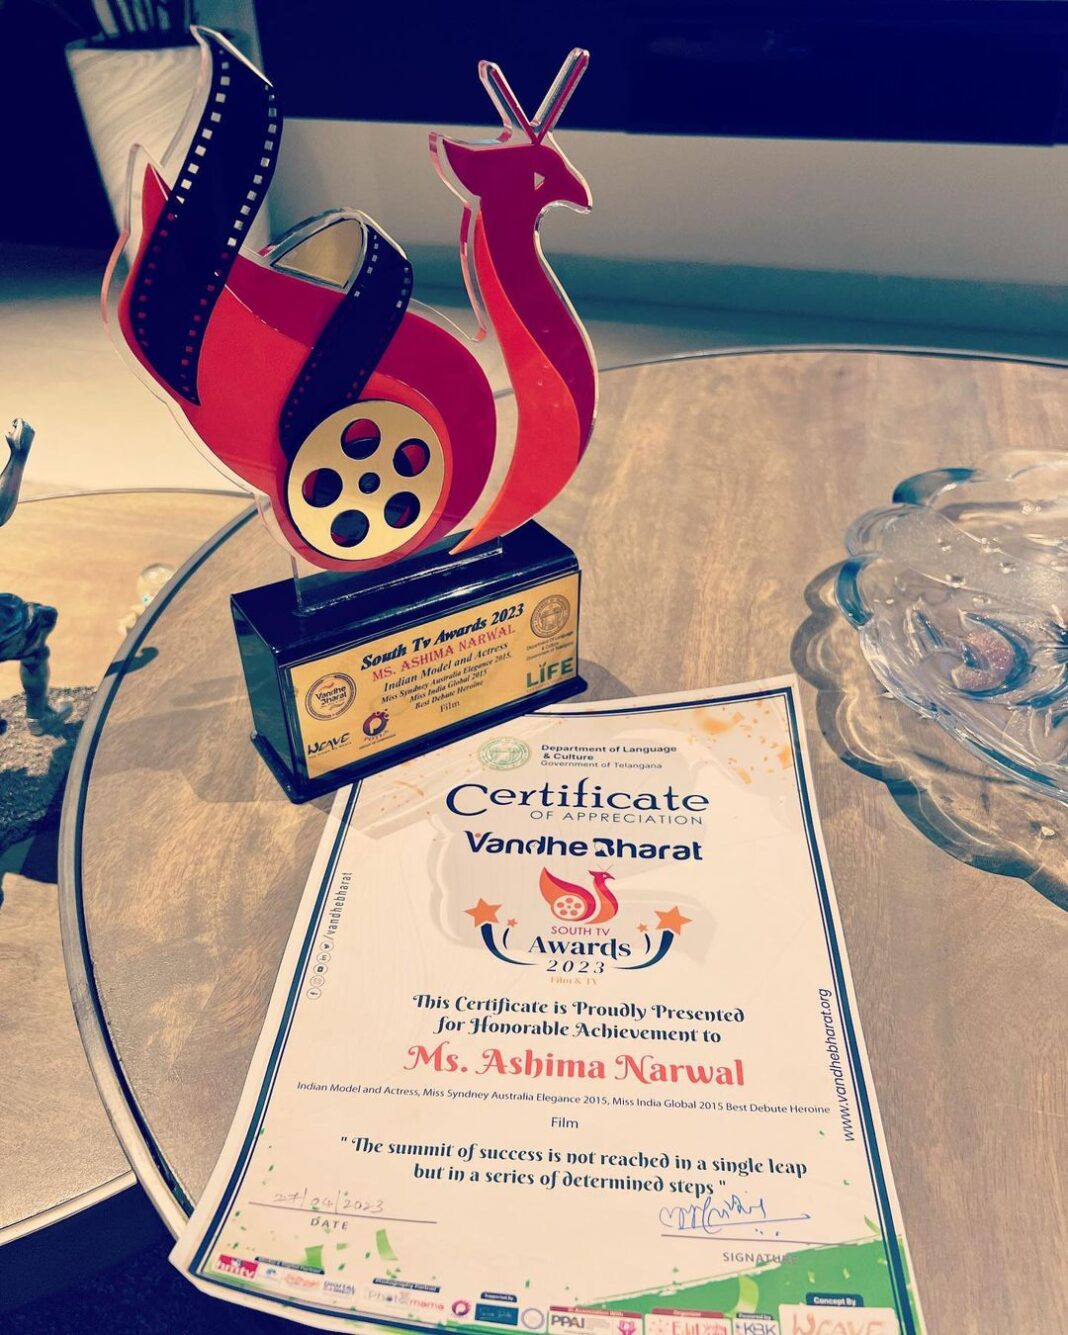 Ashima Narwal Instagram - Thank you so much Vande Bharath South TV Awards 2023 for the best actress award. And thank you to Department of language & culture Government of Telangana for this great honour! Super happy & excited!! Love Ashima 💗💗 Photog @hemanth_kumanan #ashima #ashimanarwal #tollywoodactress #bestactress #southtvawards2023 #vandebharat #indianactresses #model #ig_india #ig_mumbai #ig_delhi #ig_hyderabad Hyderabad